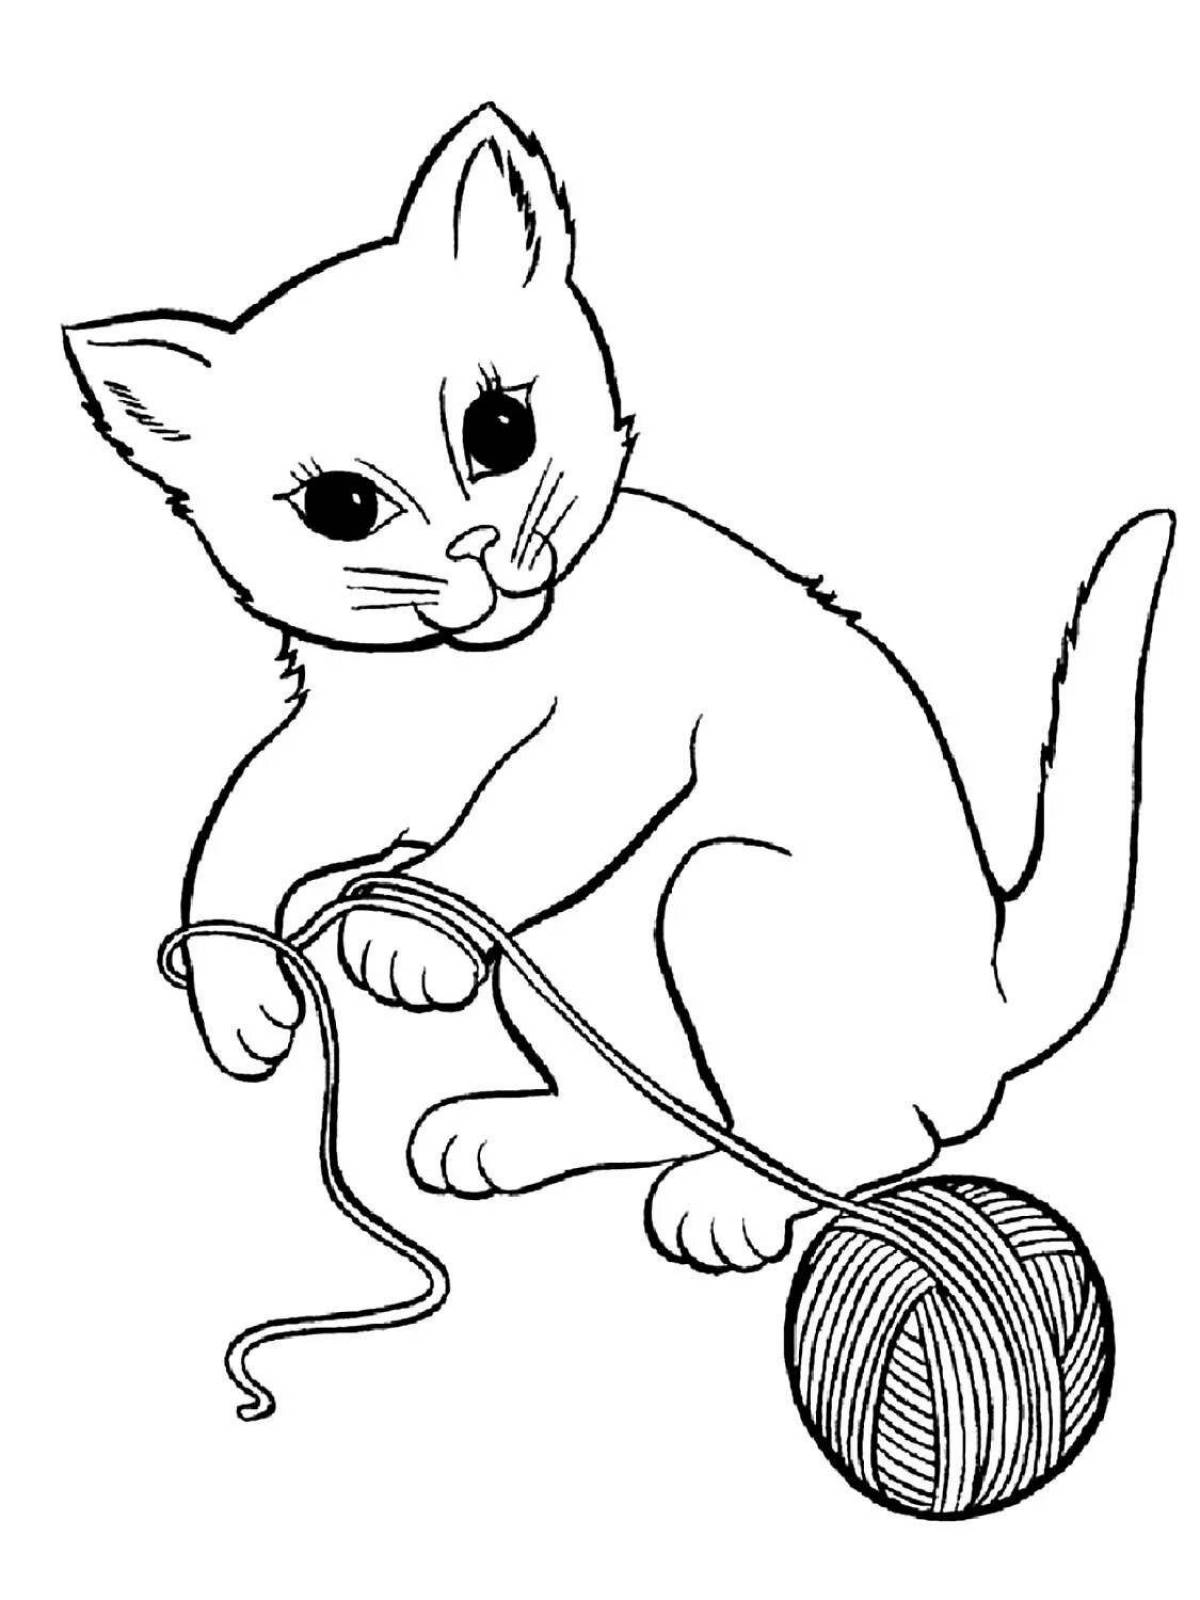 Coloring page playful cat